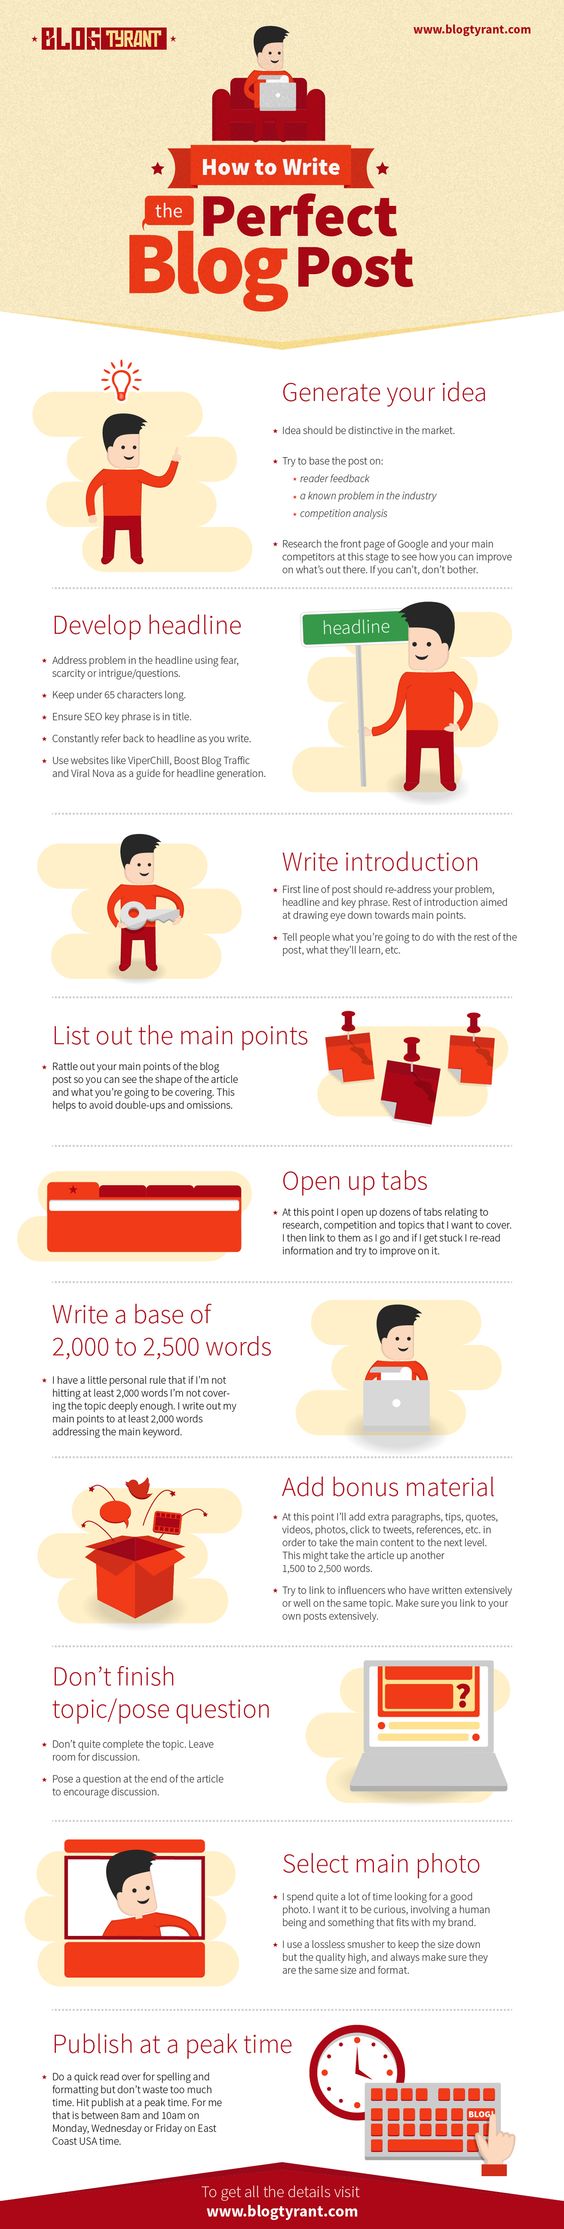 7 Awesome Tips For Writing Brilliant Blog Posts [Infographic] | Social Media Today